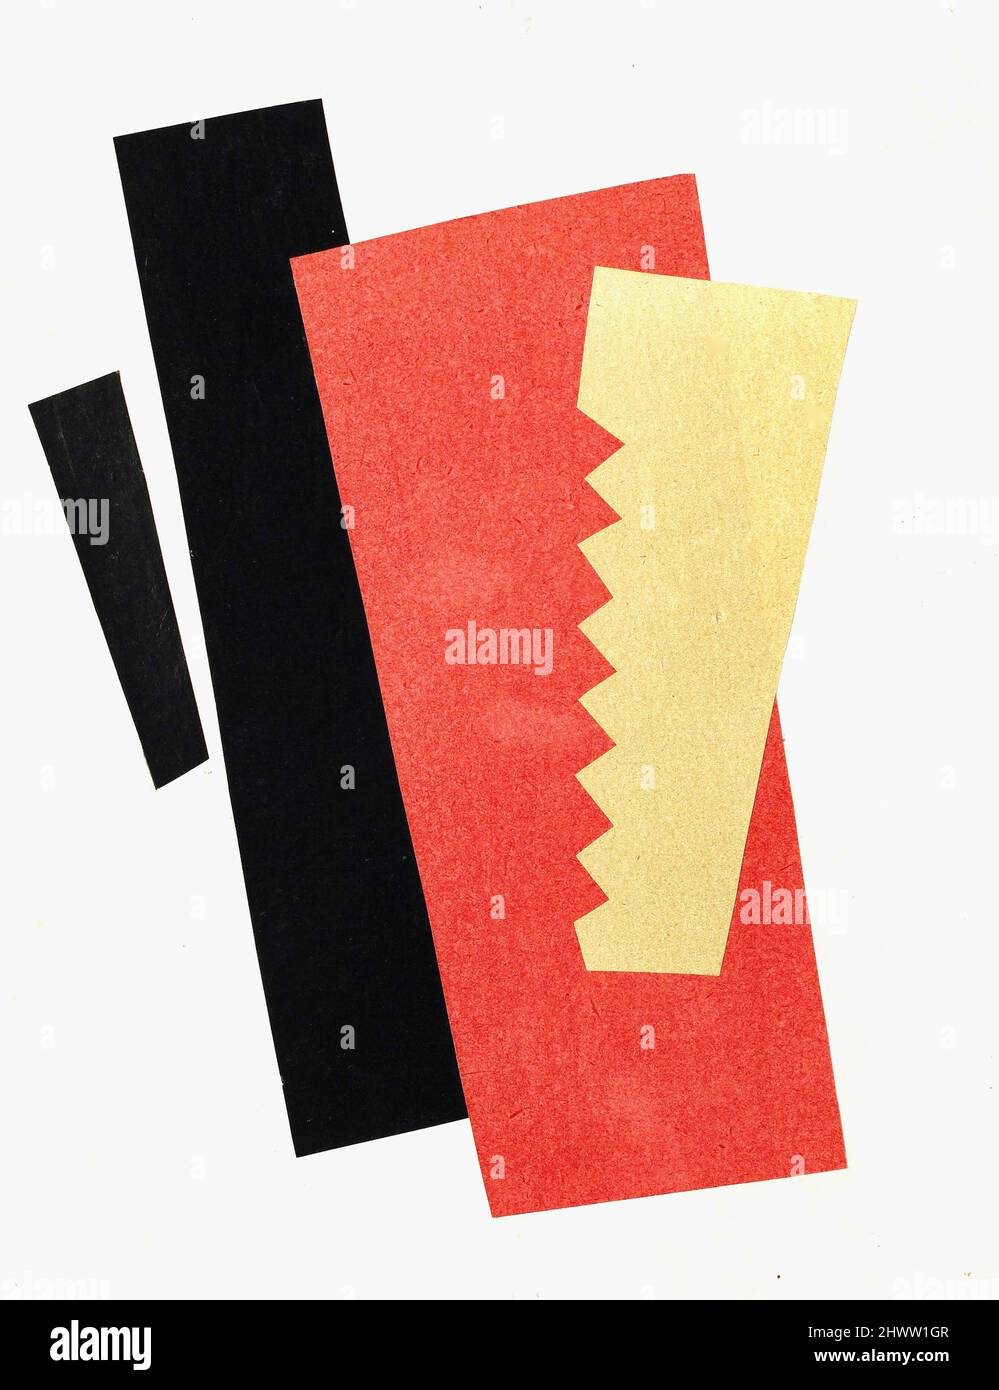 El Lissitzky - Red Black Gold - 1920 Stock Photo